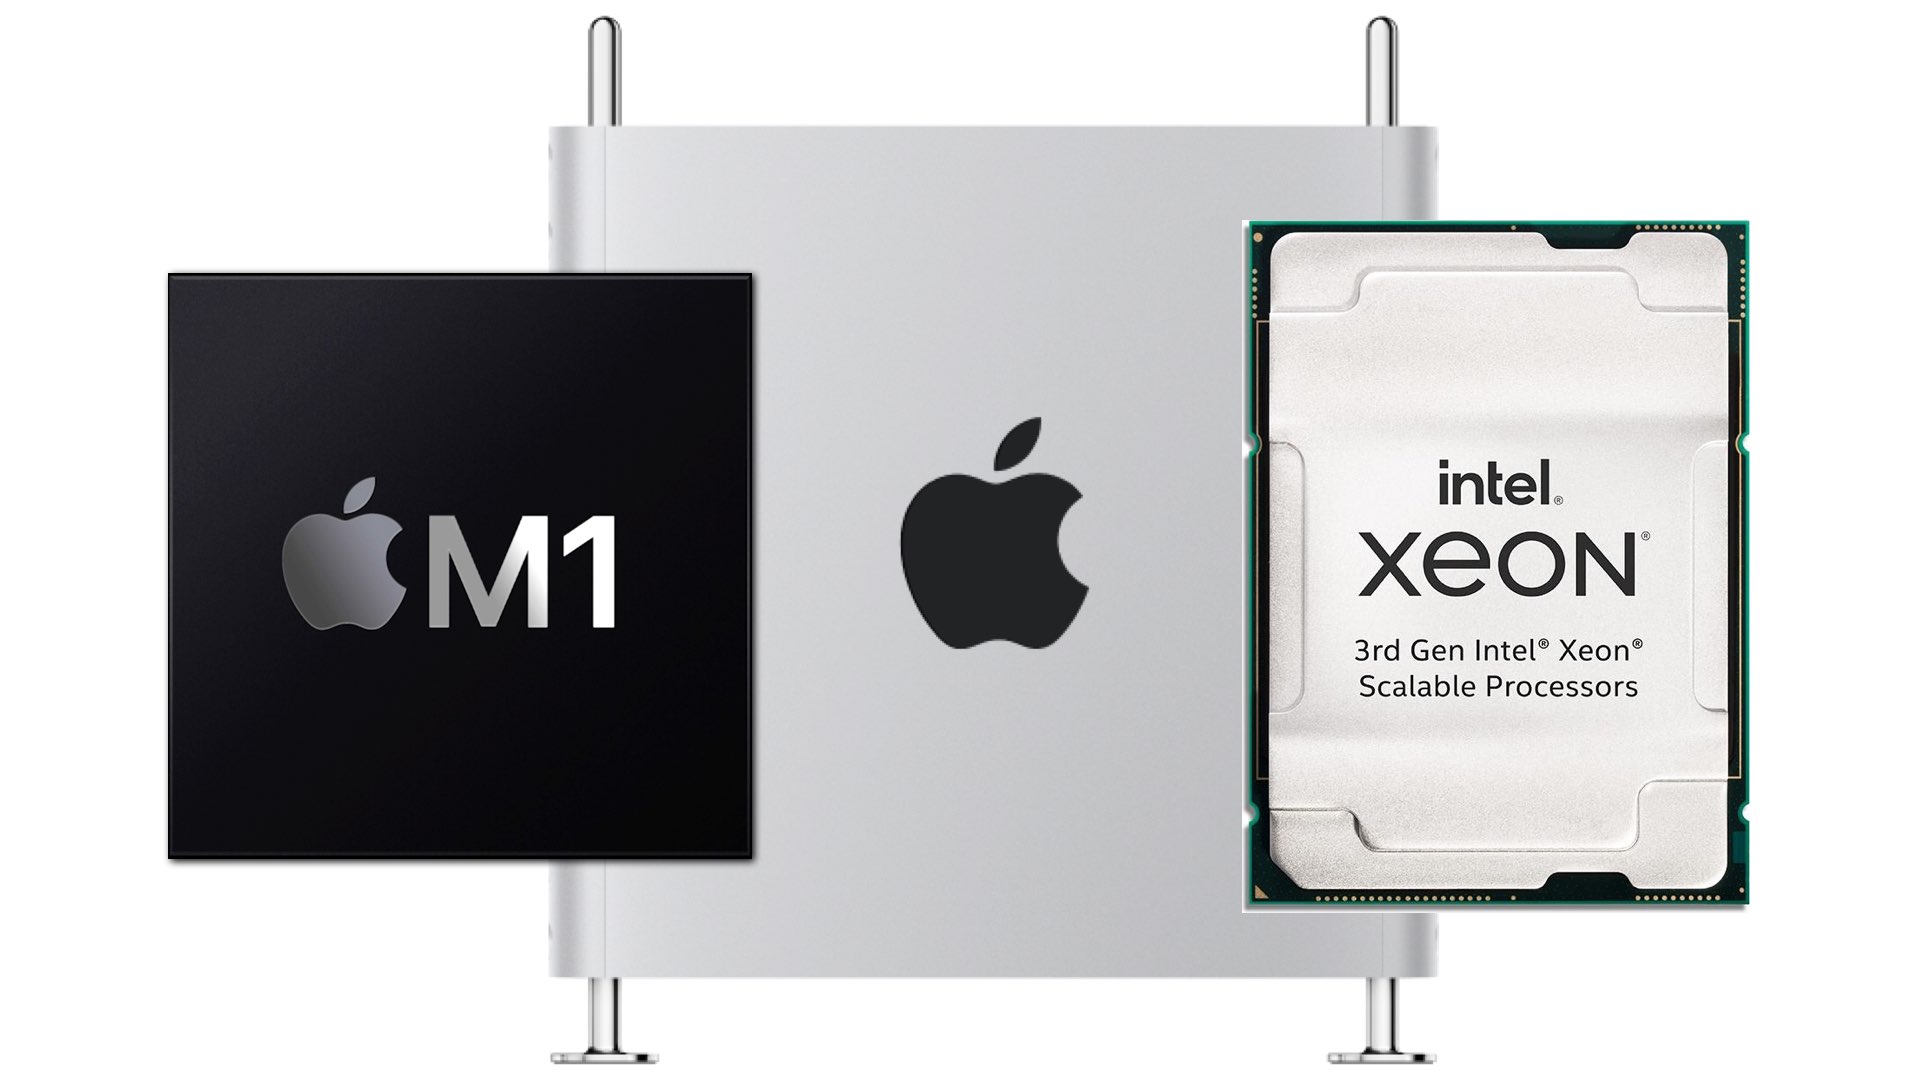 Be prepared to 2 Mac Pro Machines: Half the Size M1 and ‘Regular’ Size Intel